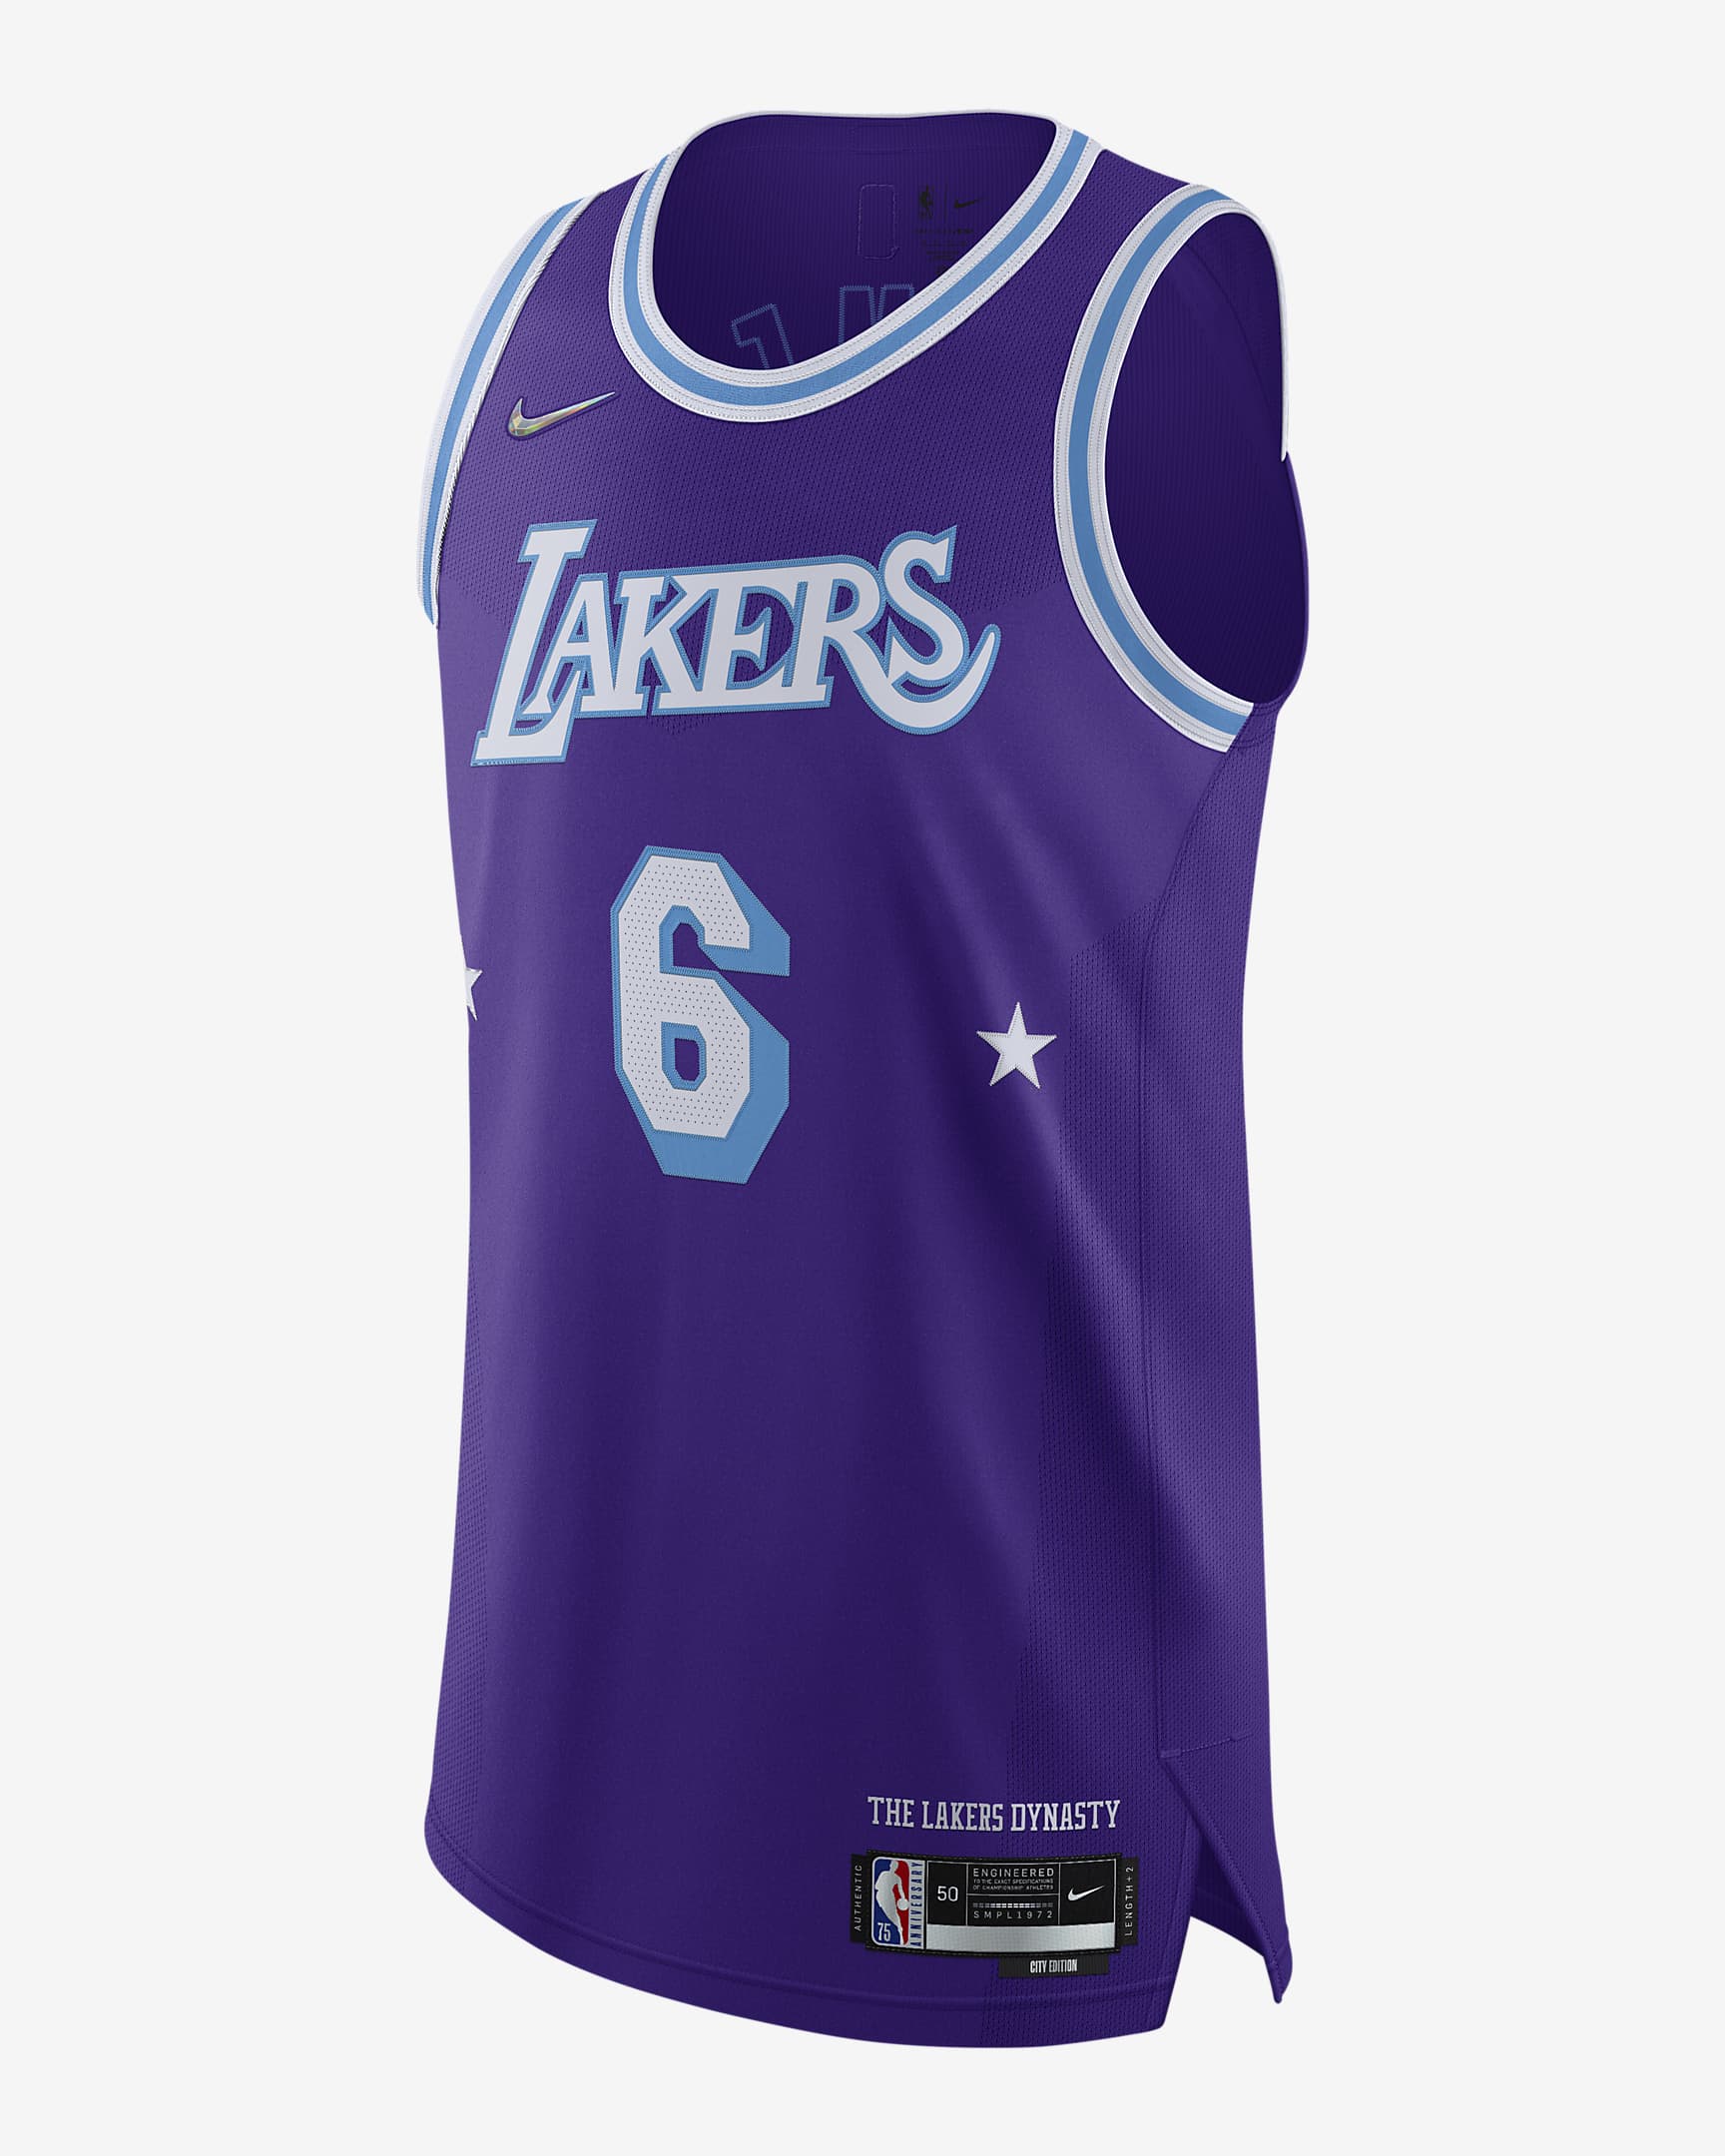 los-angeles-lakers-city-edition-dri-fit-adv-nba-authentic-jersey-3QM76z.png